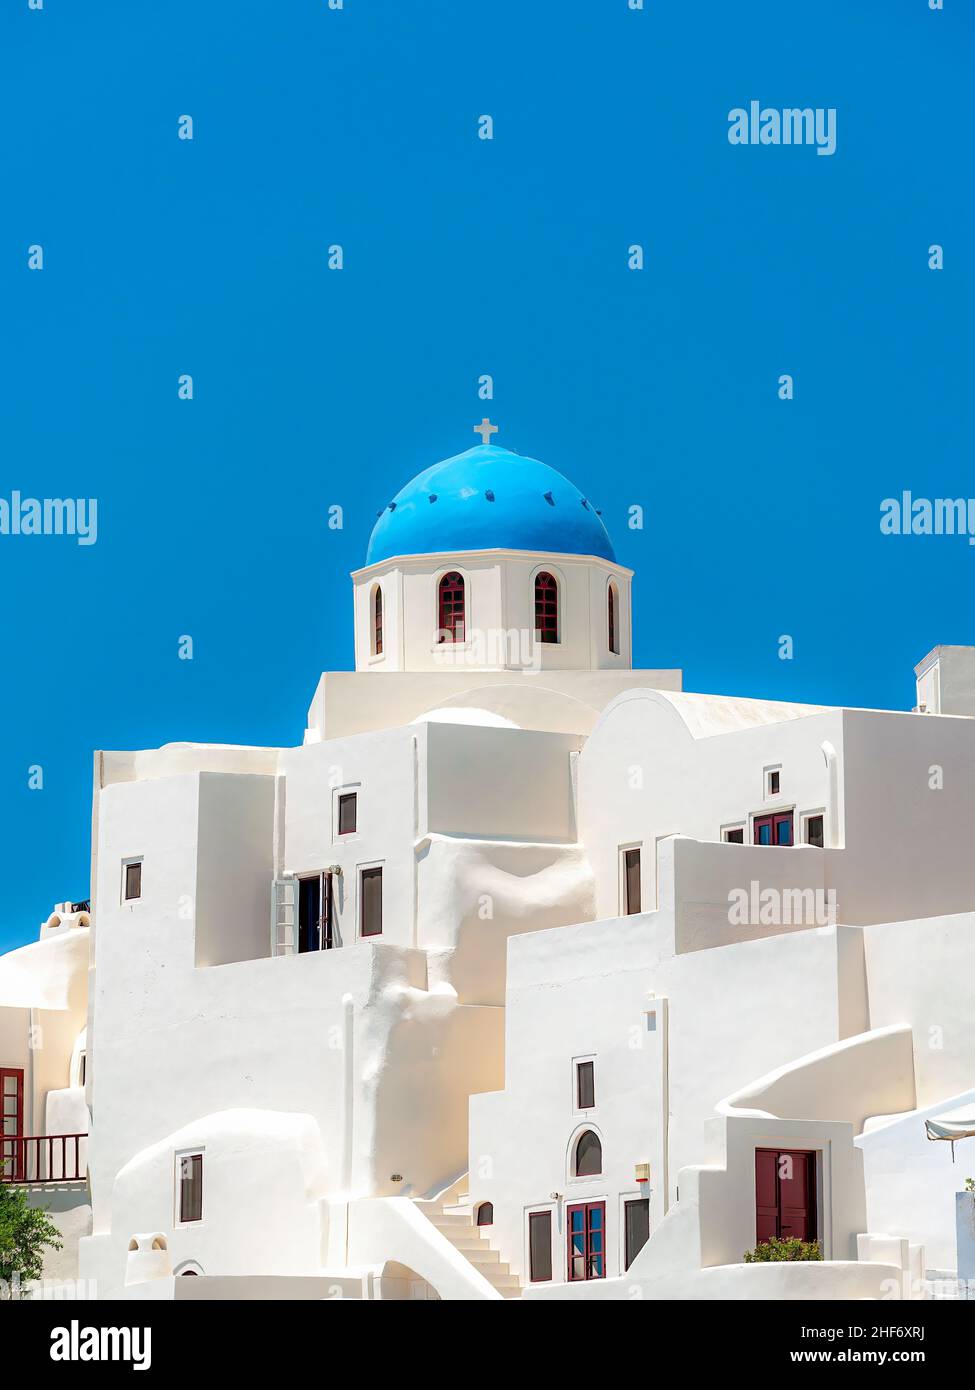 One of the many orthodox churches that adorn the Greek island of Santorini. Stock Photo